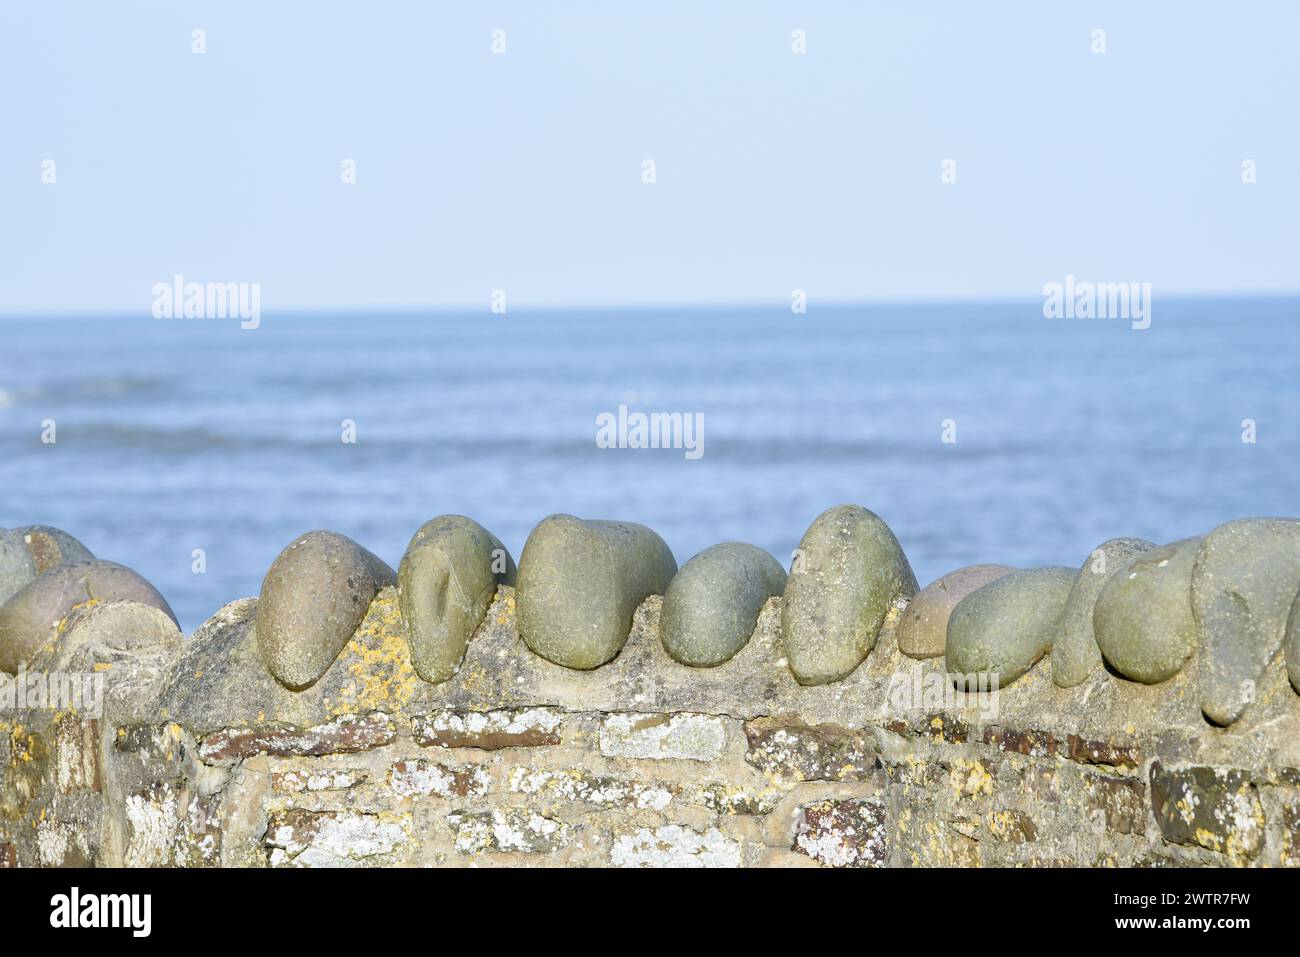 Stone sea wall with a clear view out over the ocean Stock Photo